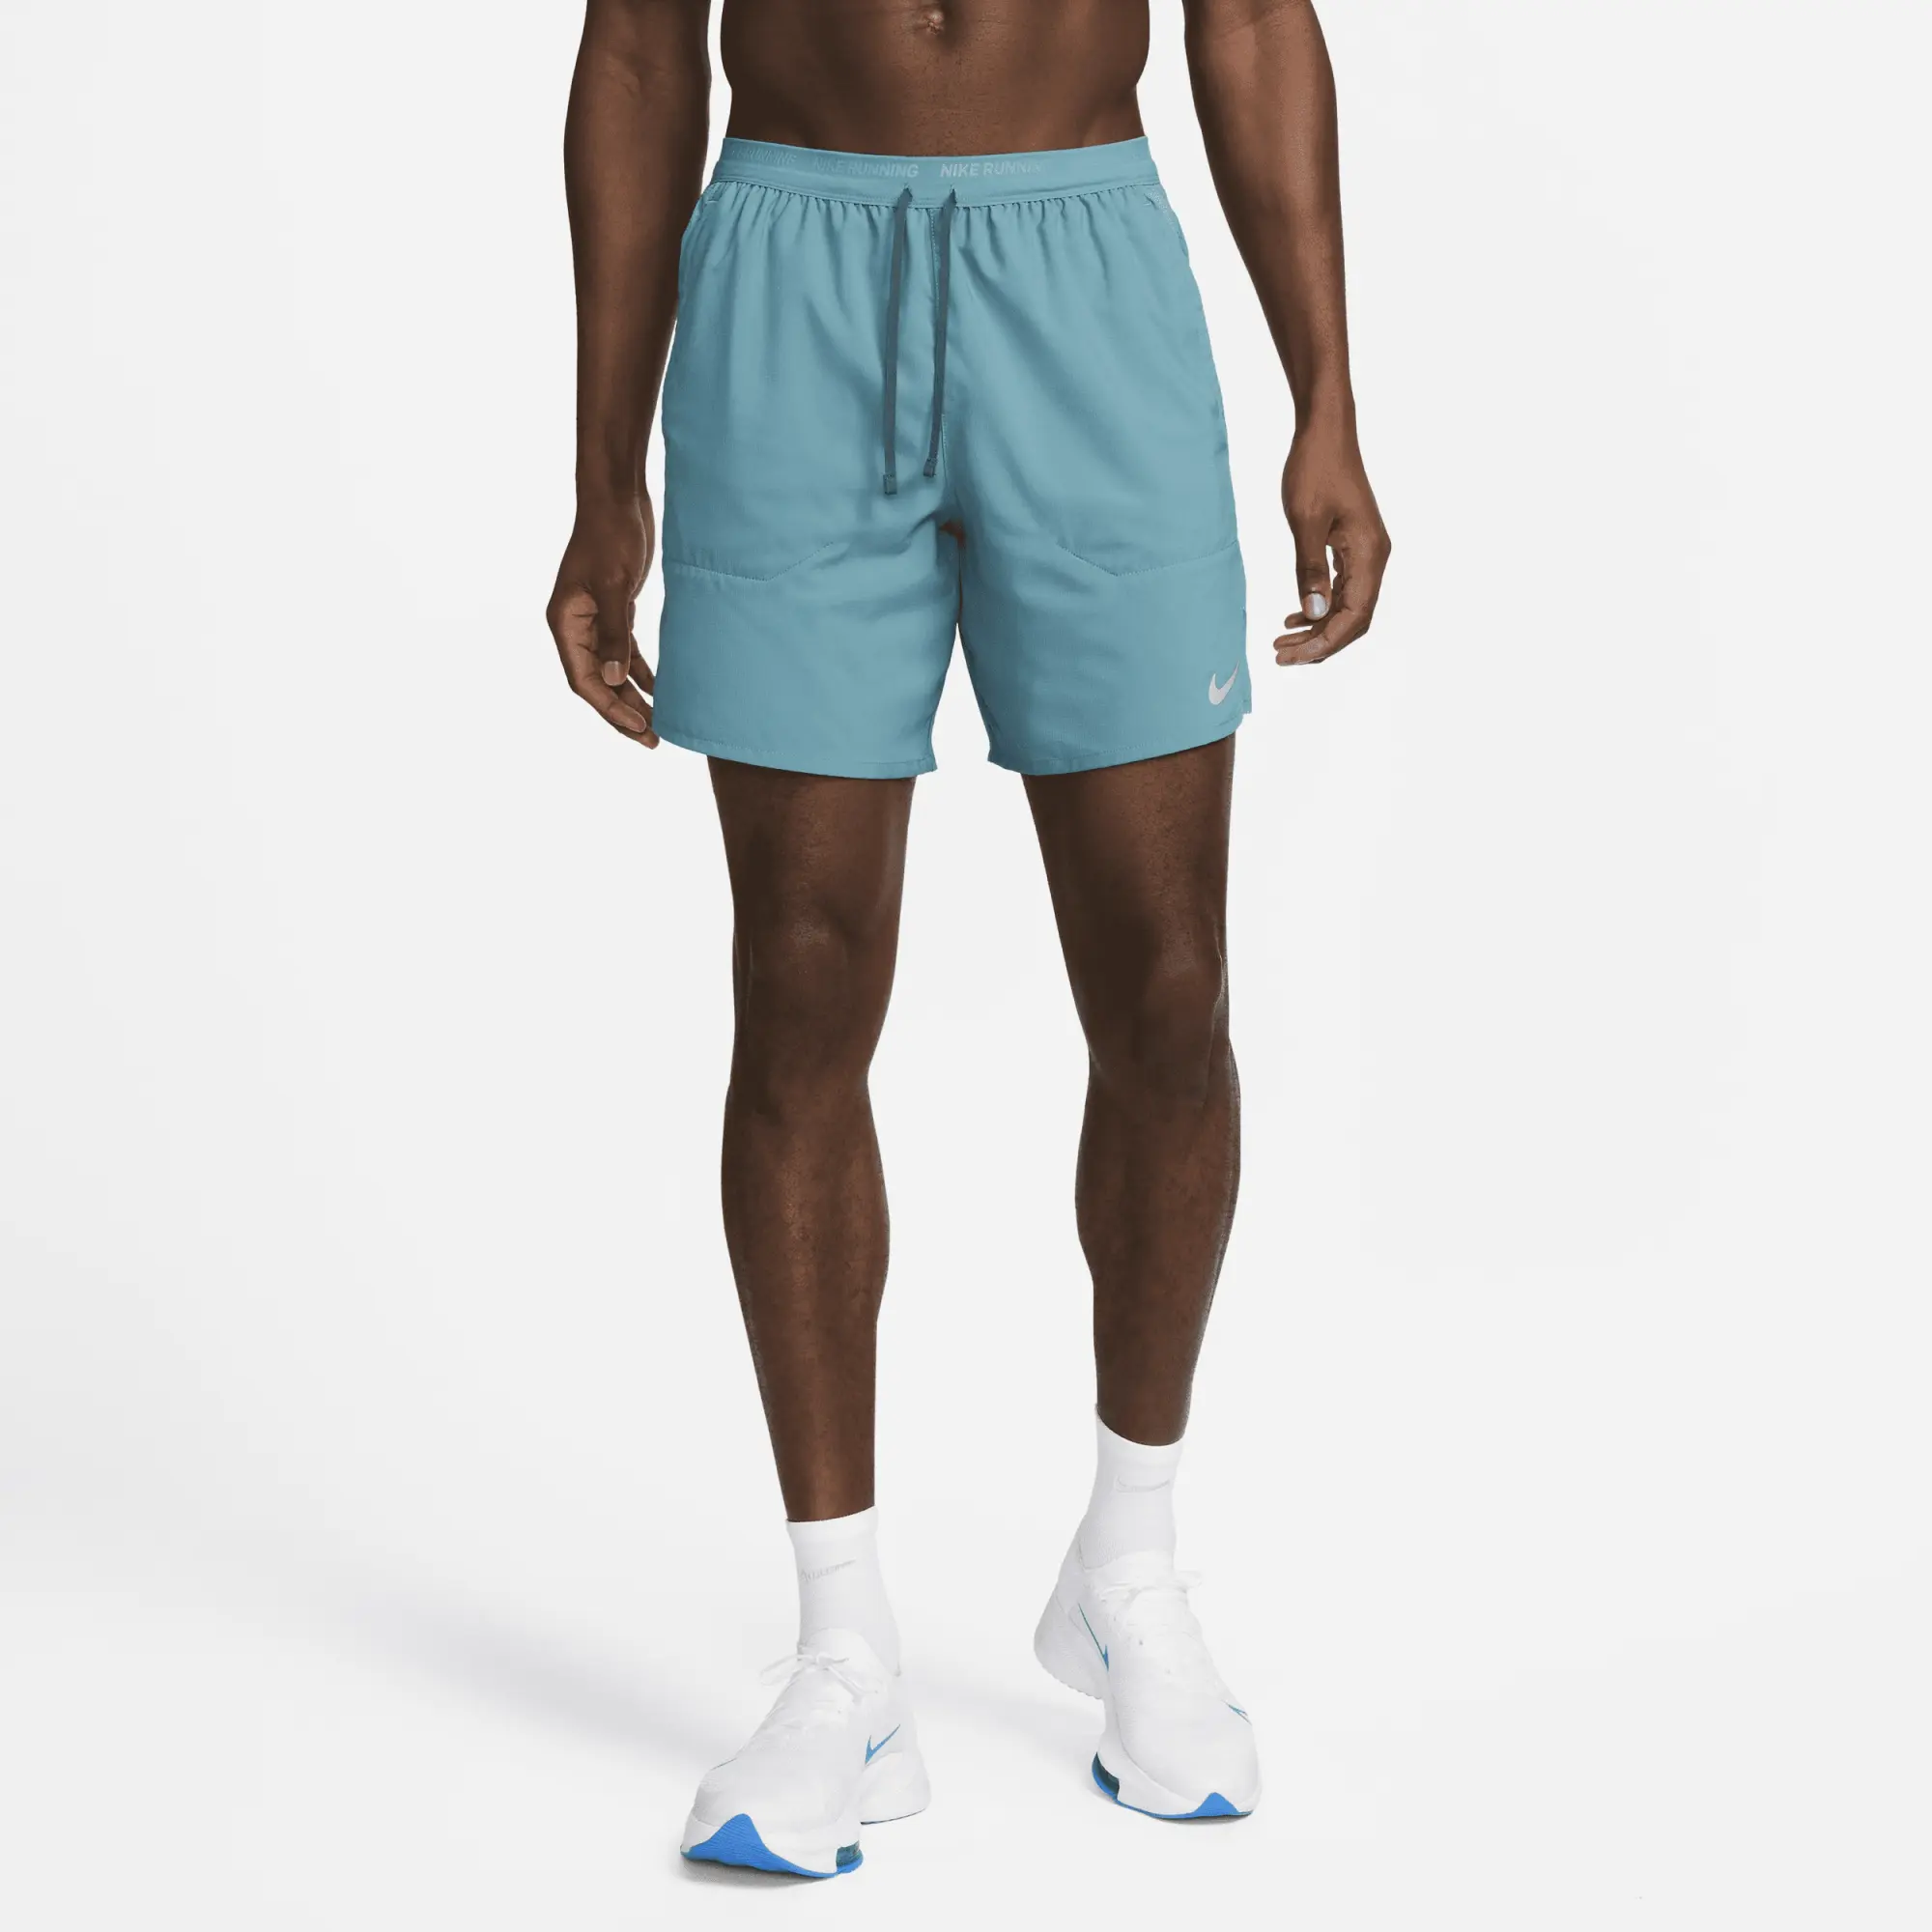 Nike Dri-FIT Stride Men's 7 Brief-Lined Running Shorts - Green